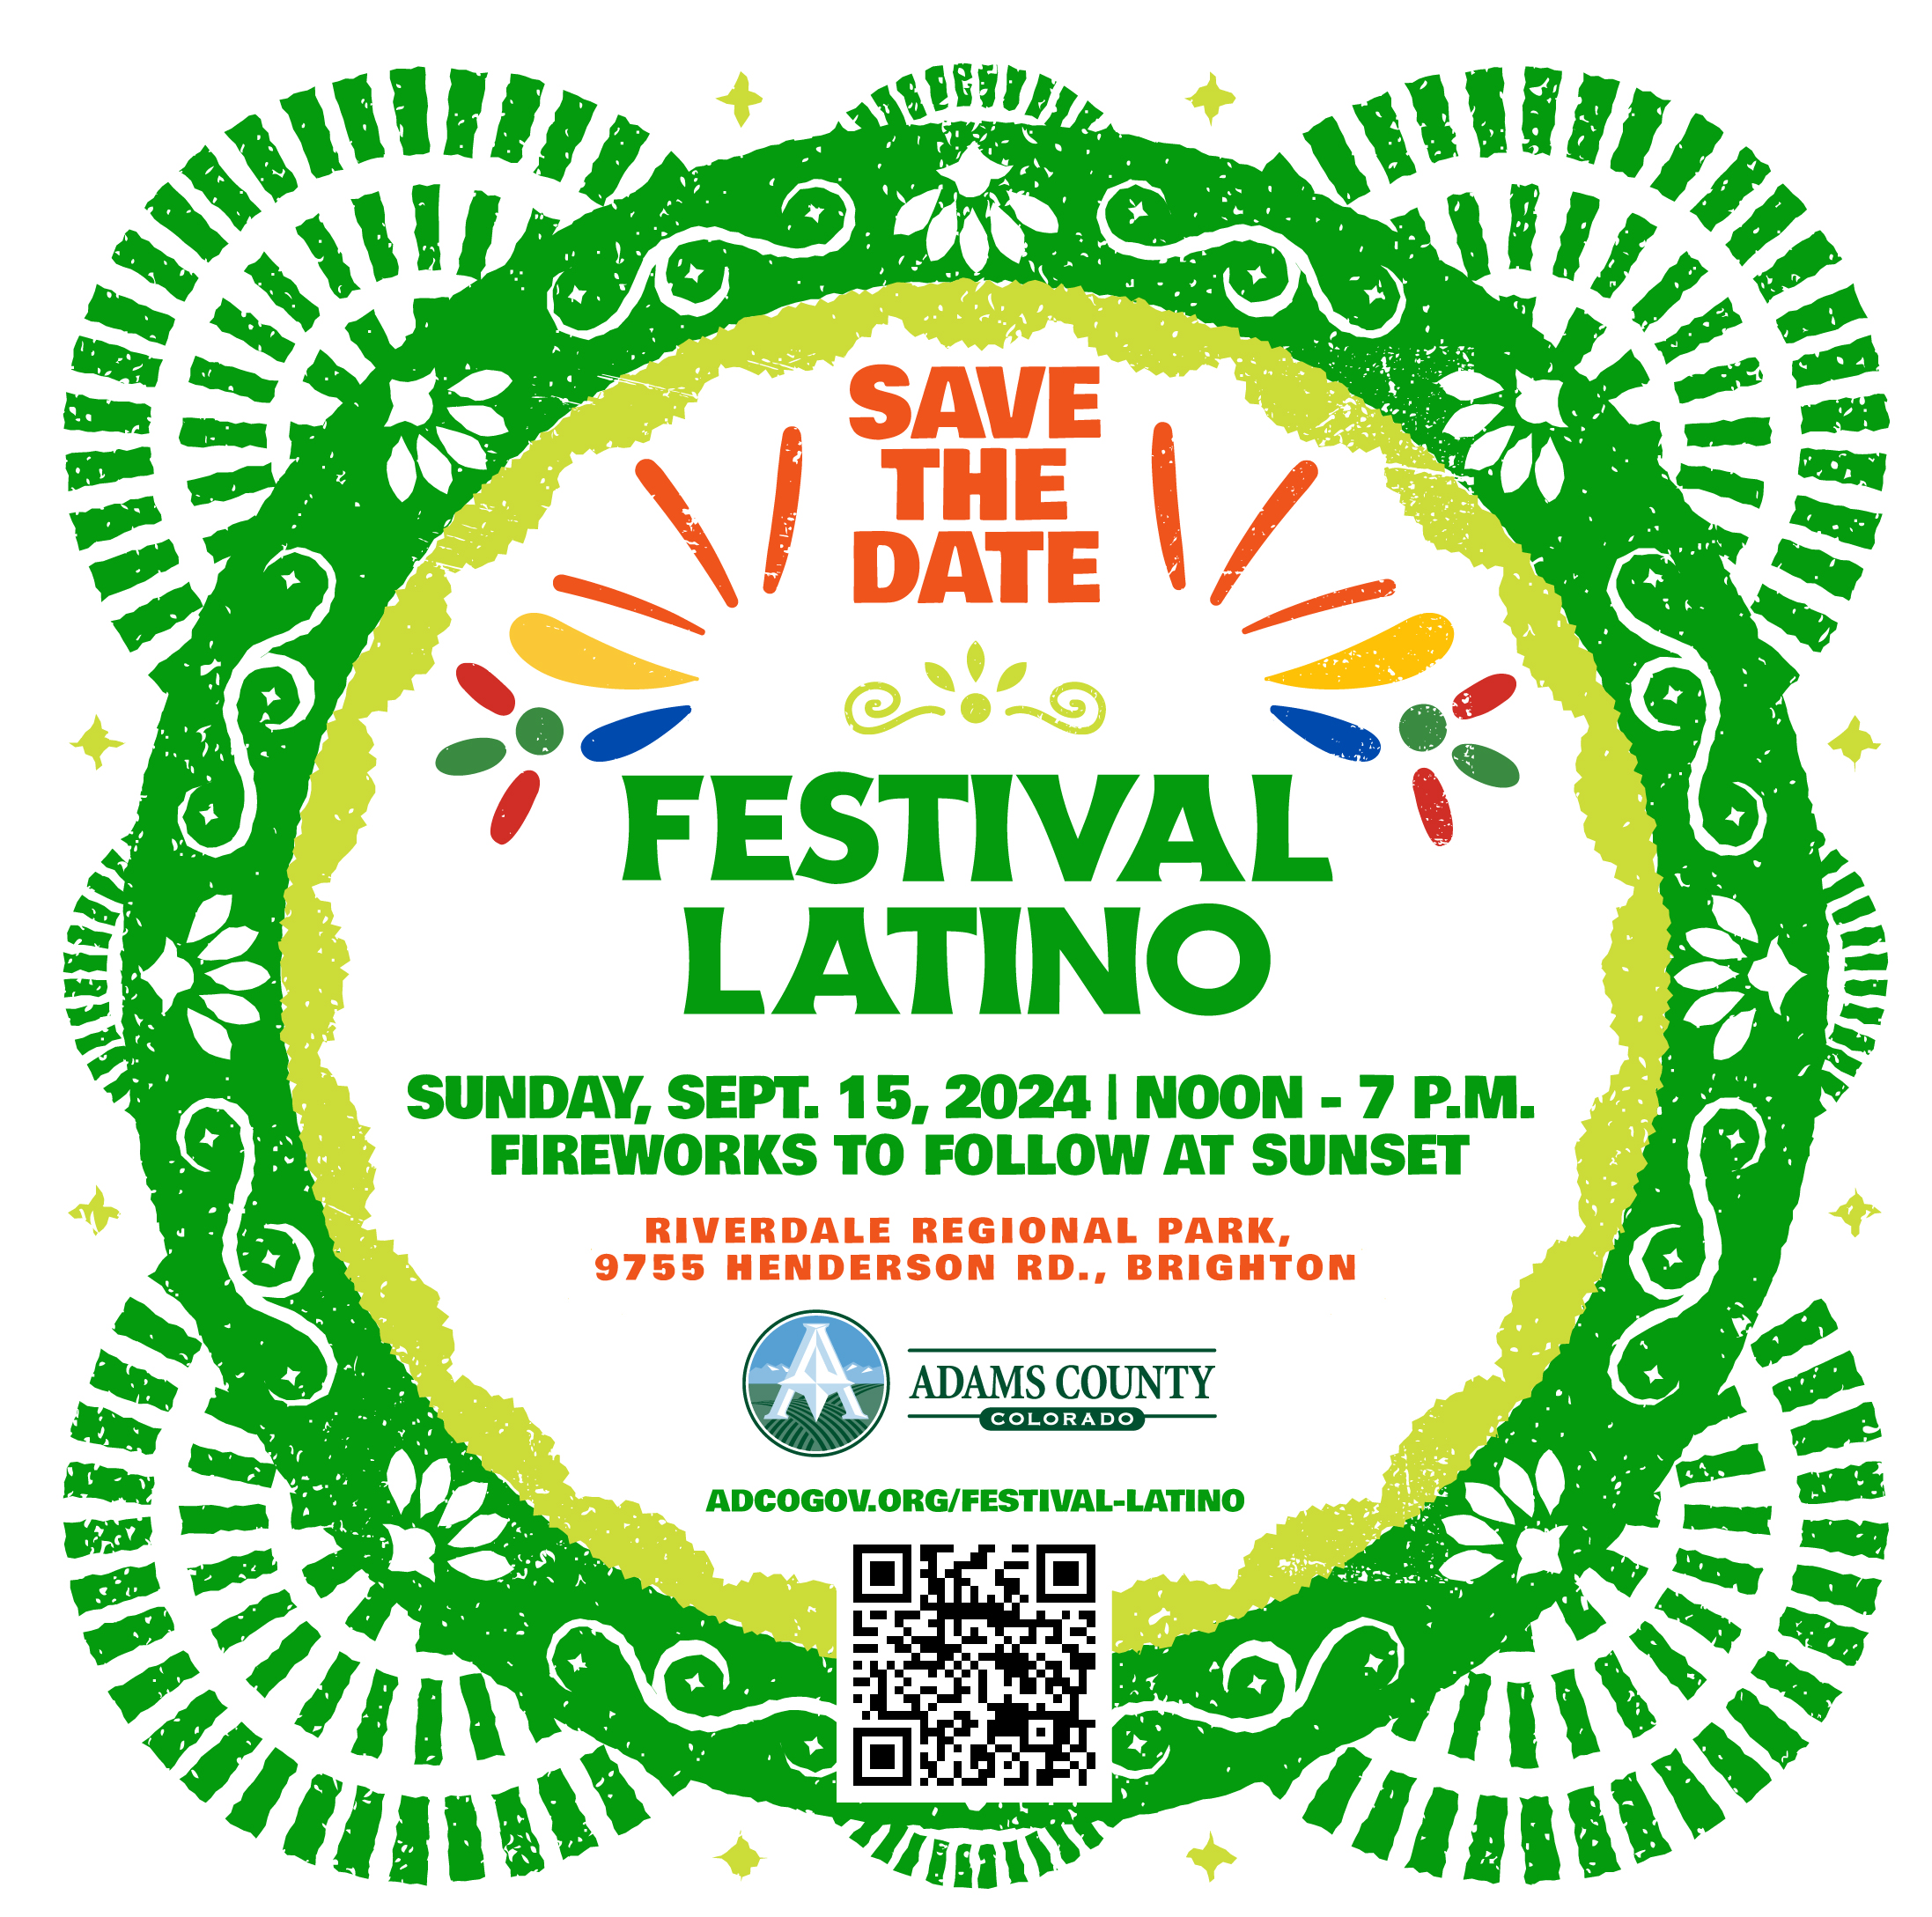 Festival Latino - Save the Date